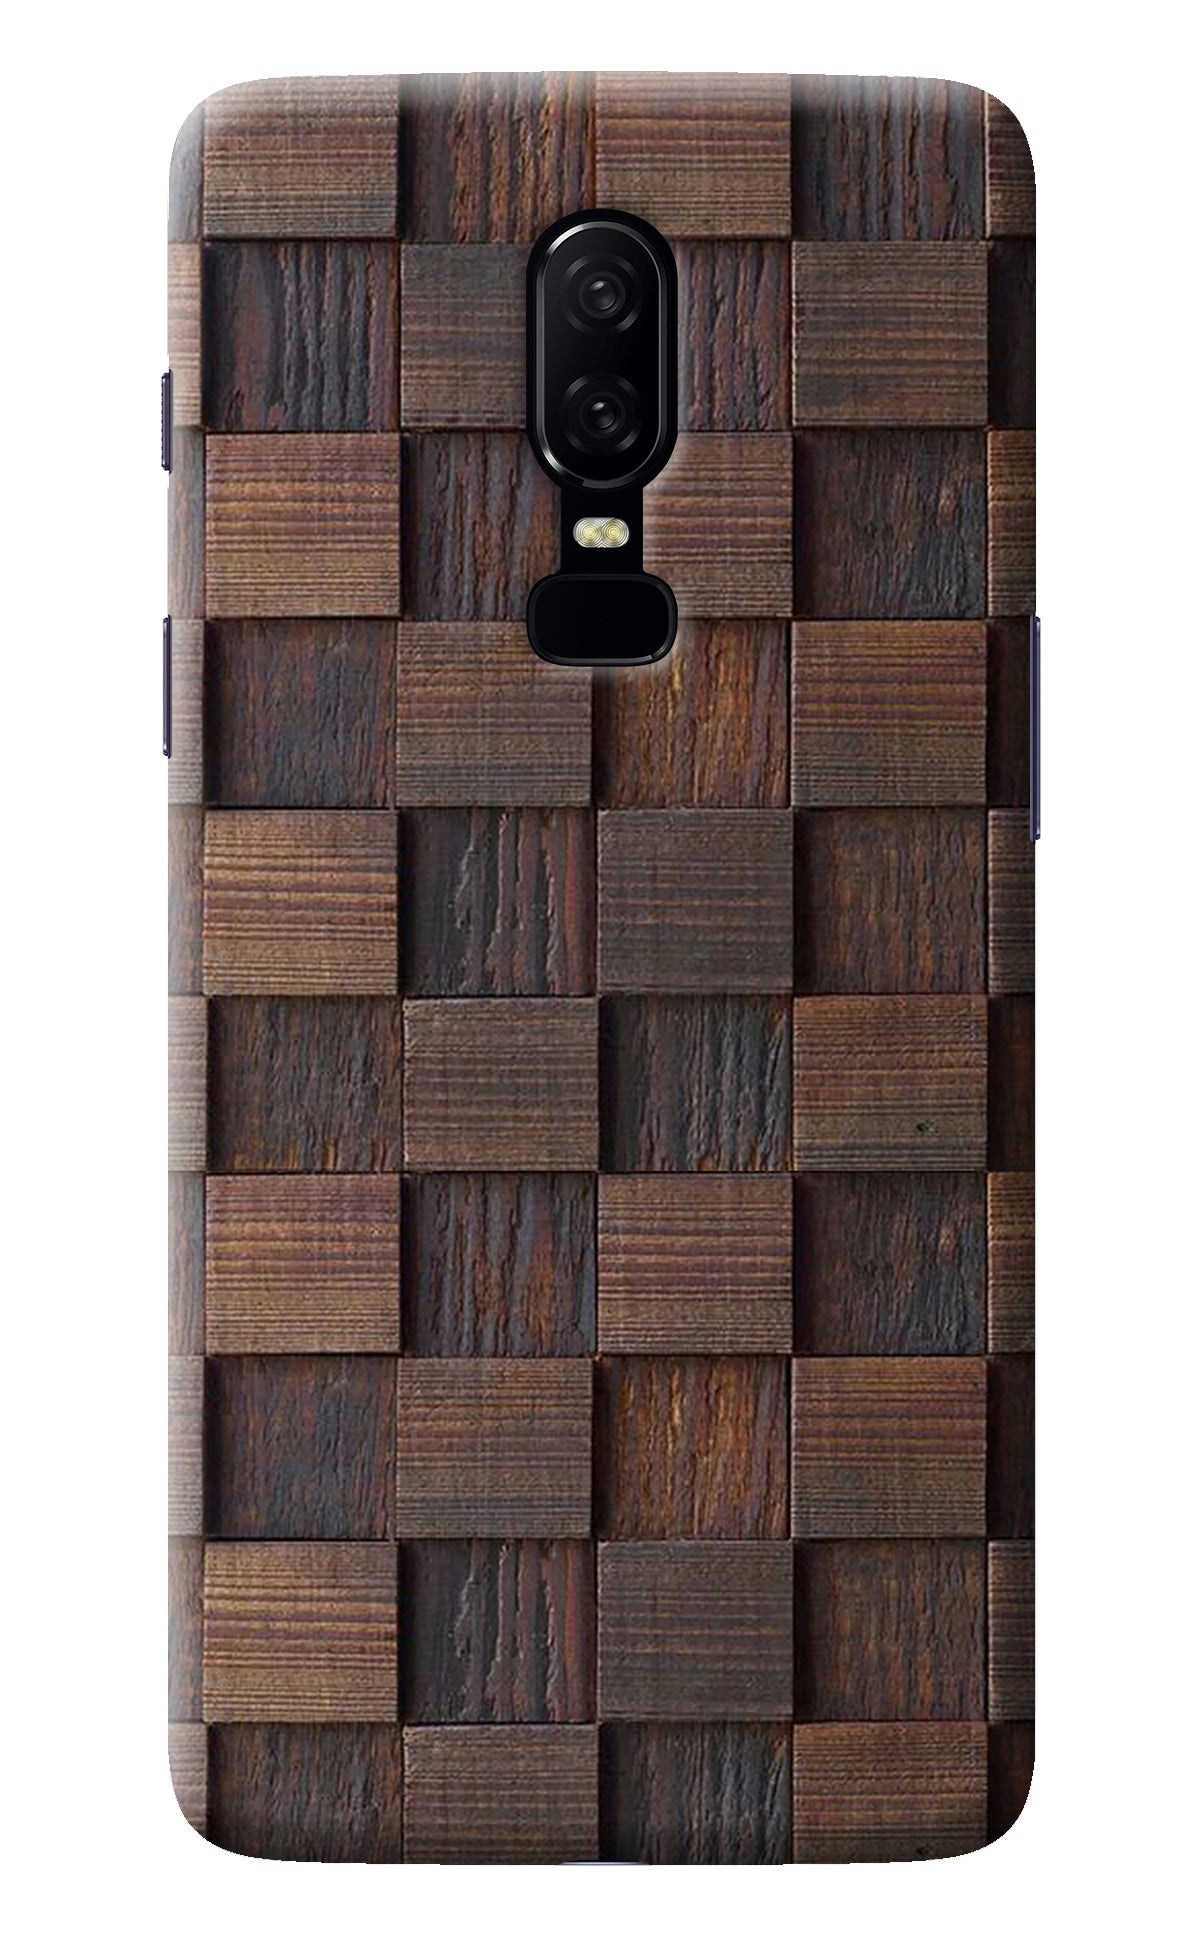 Wooden Cube Design Oneplus 6 Back Cover